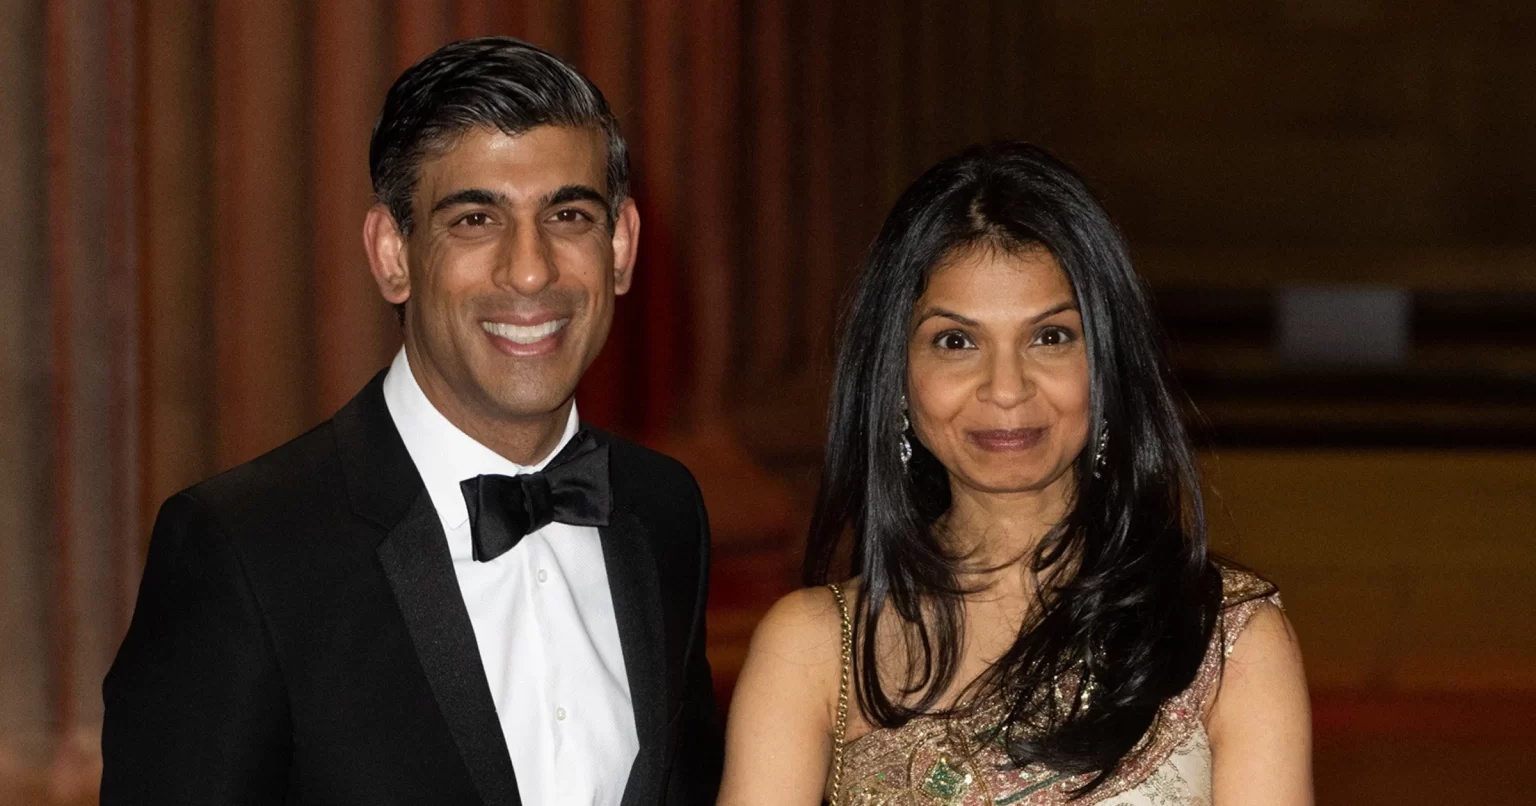 The list of 20 richest Asian billionaires in the UK